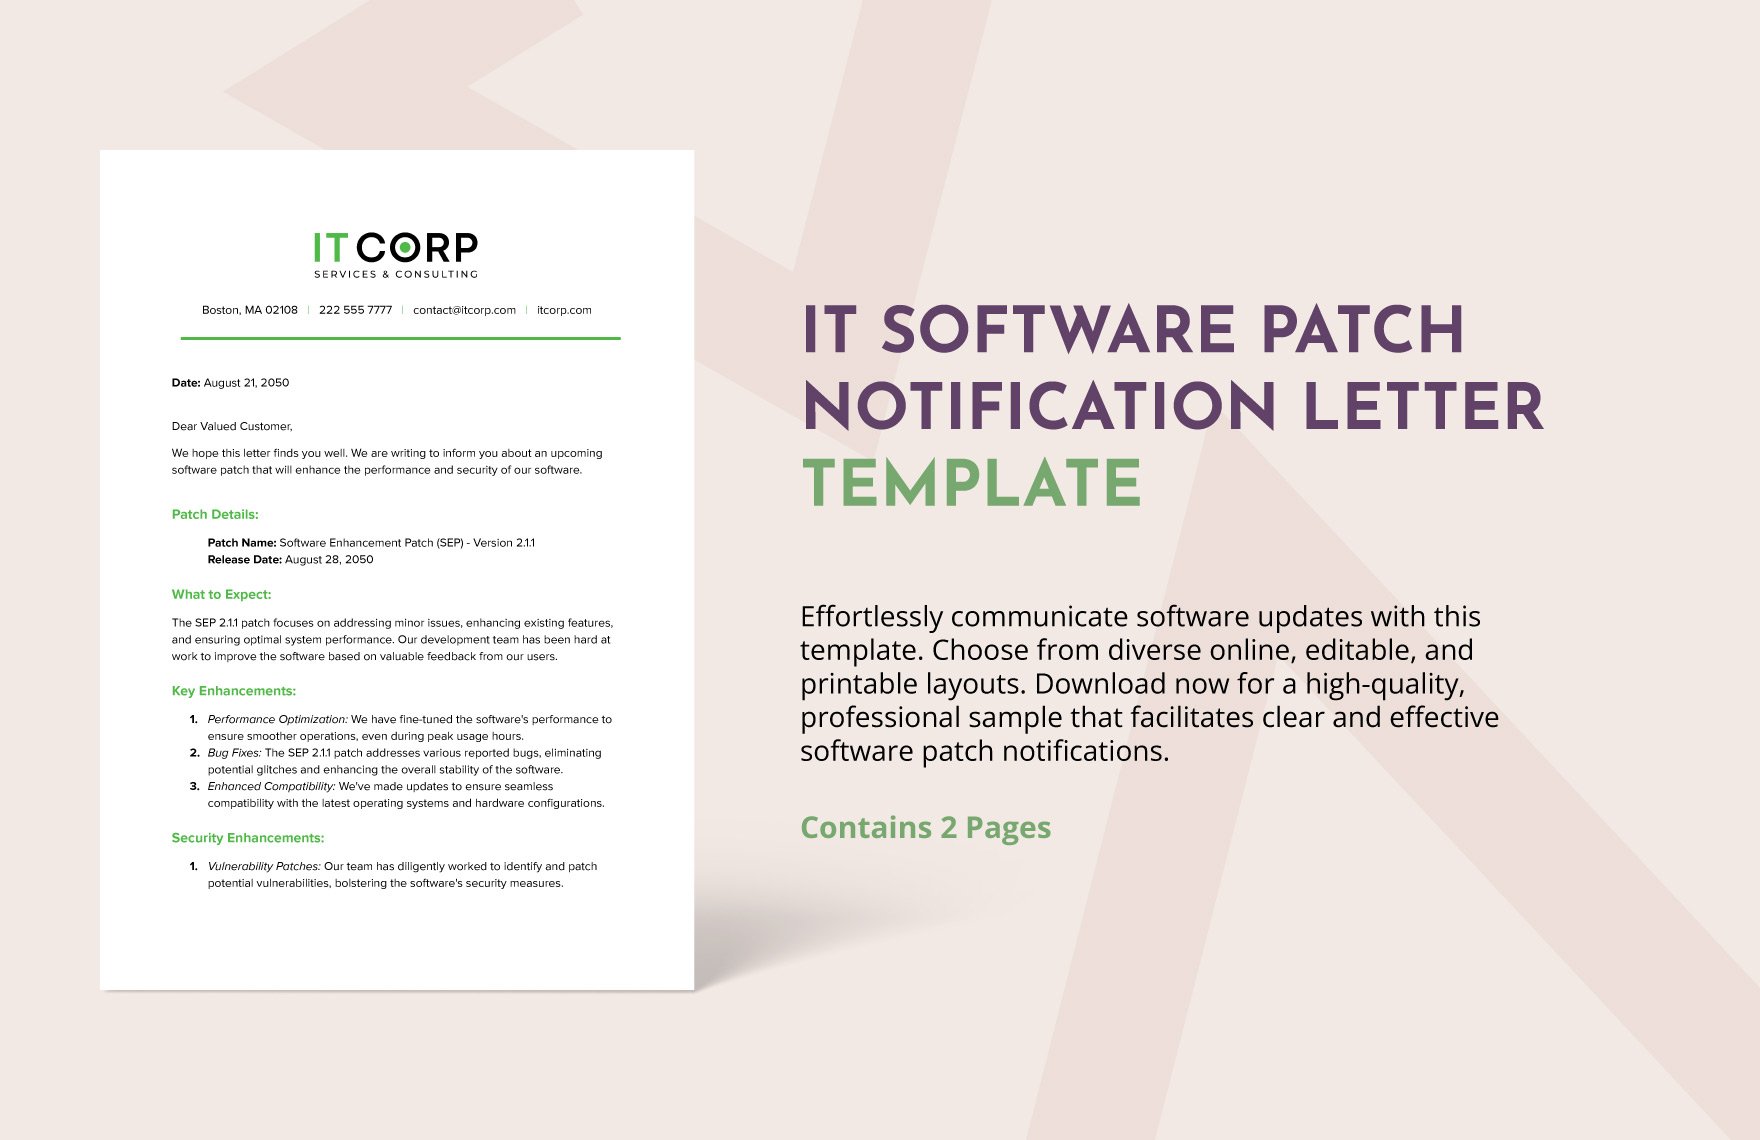 IT Software Patch Notification Letter Template in Word, Google Docs, PDF